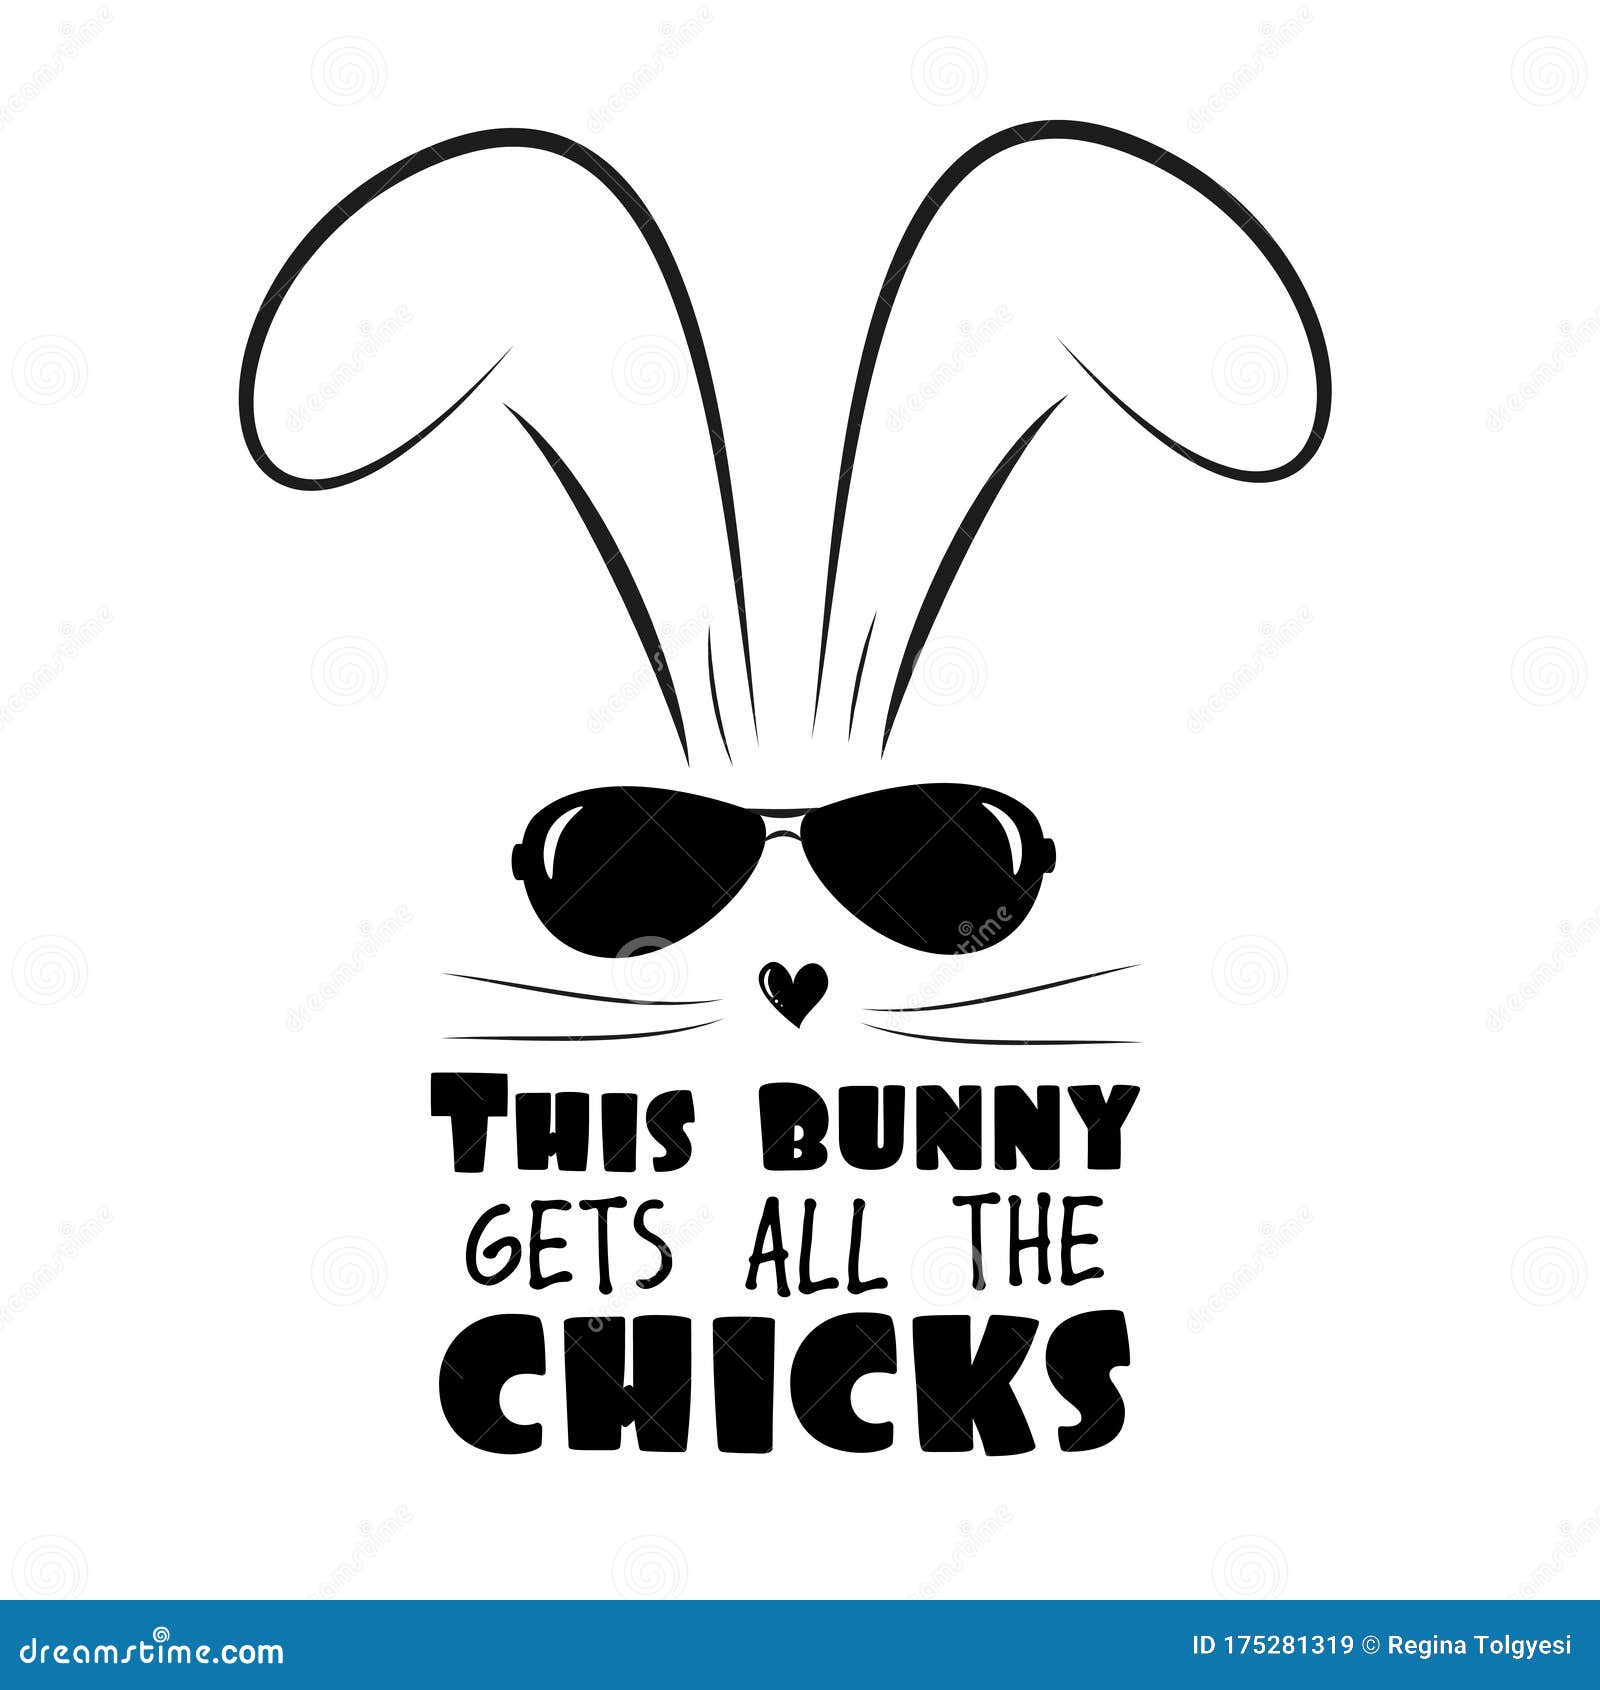 this bunny gets all the chicks - funny text wit cool rabbit